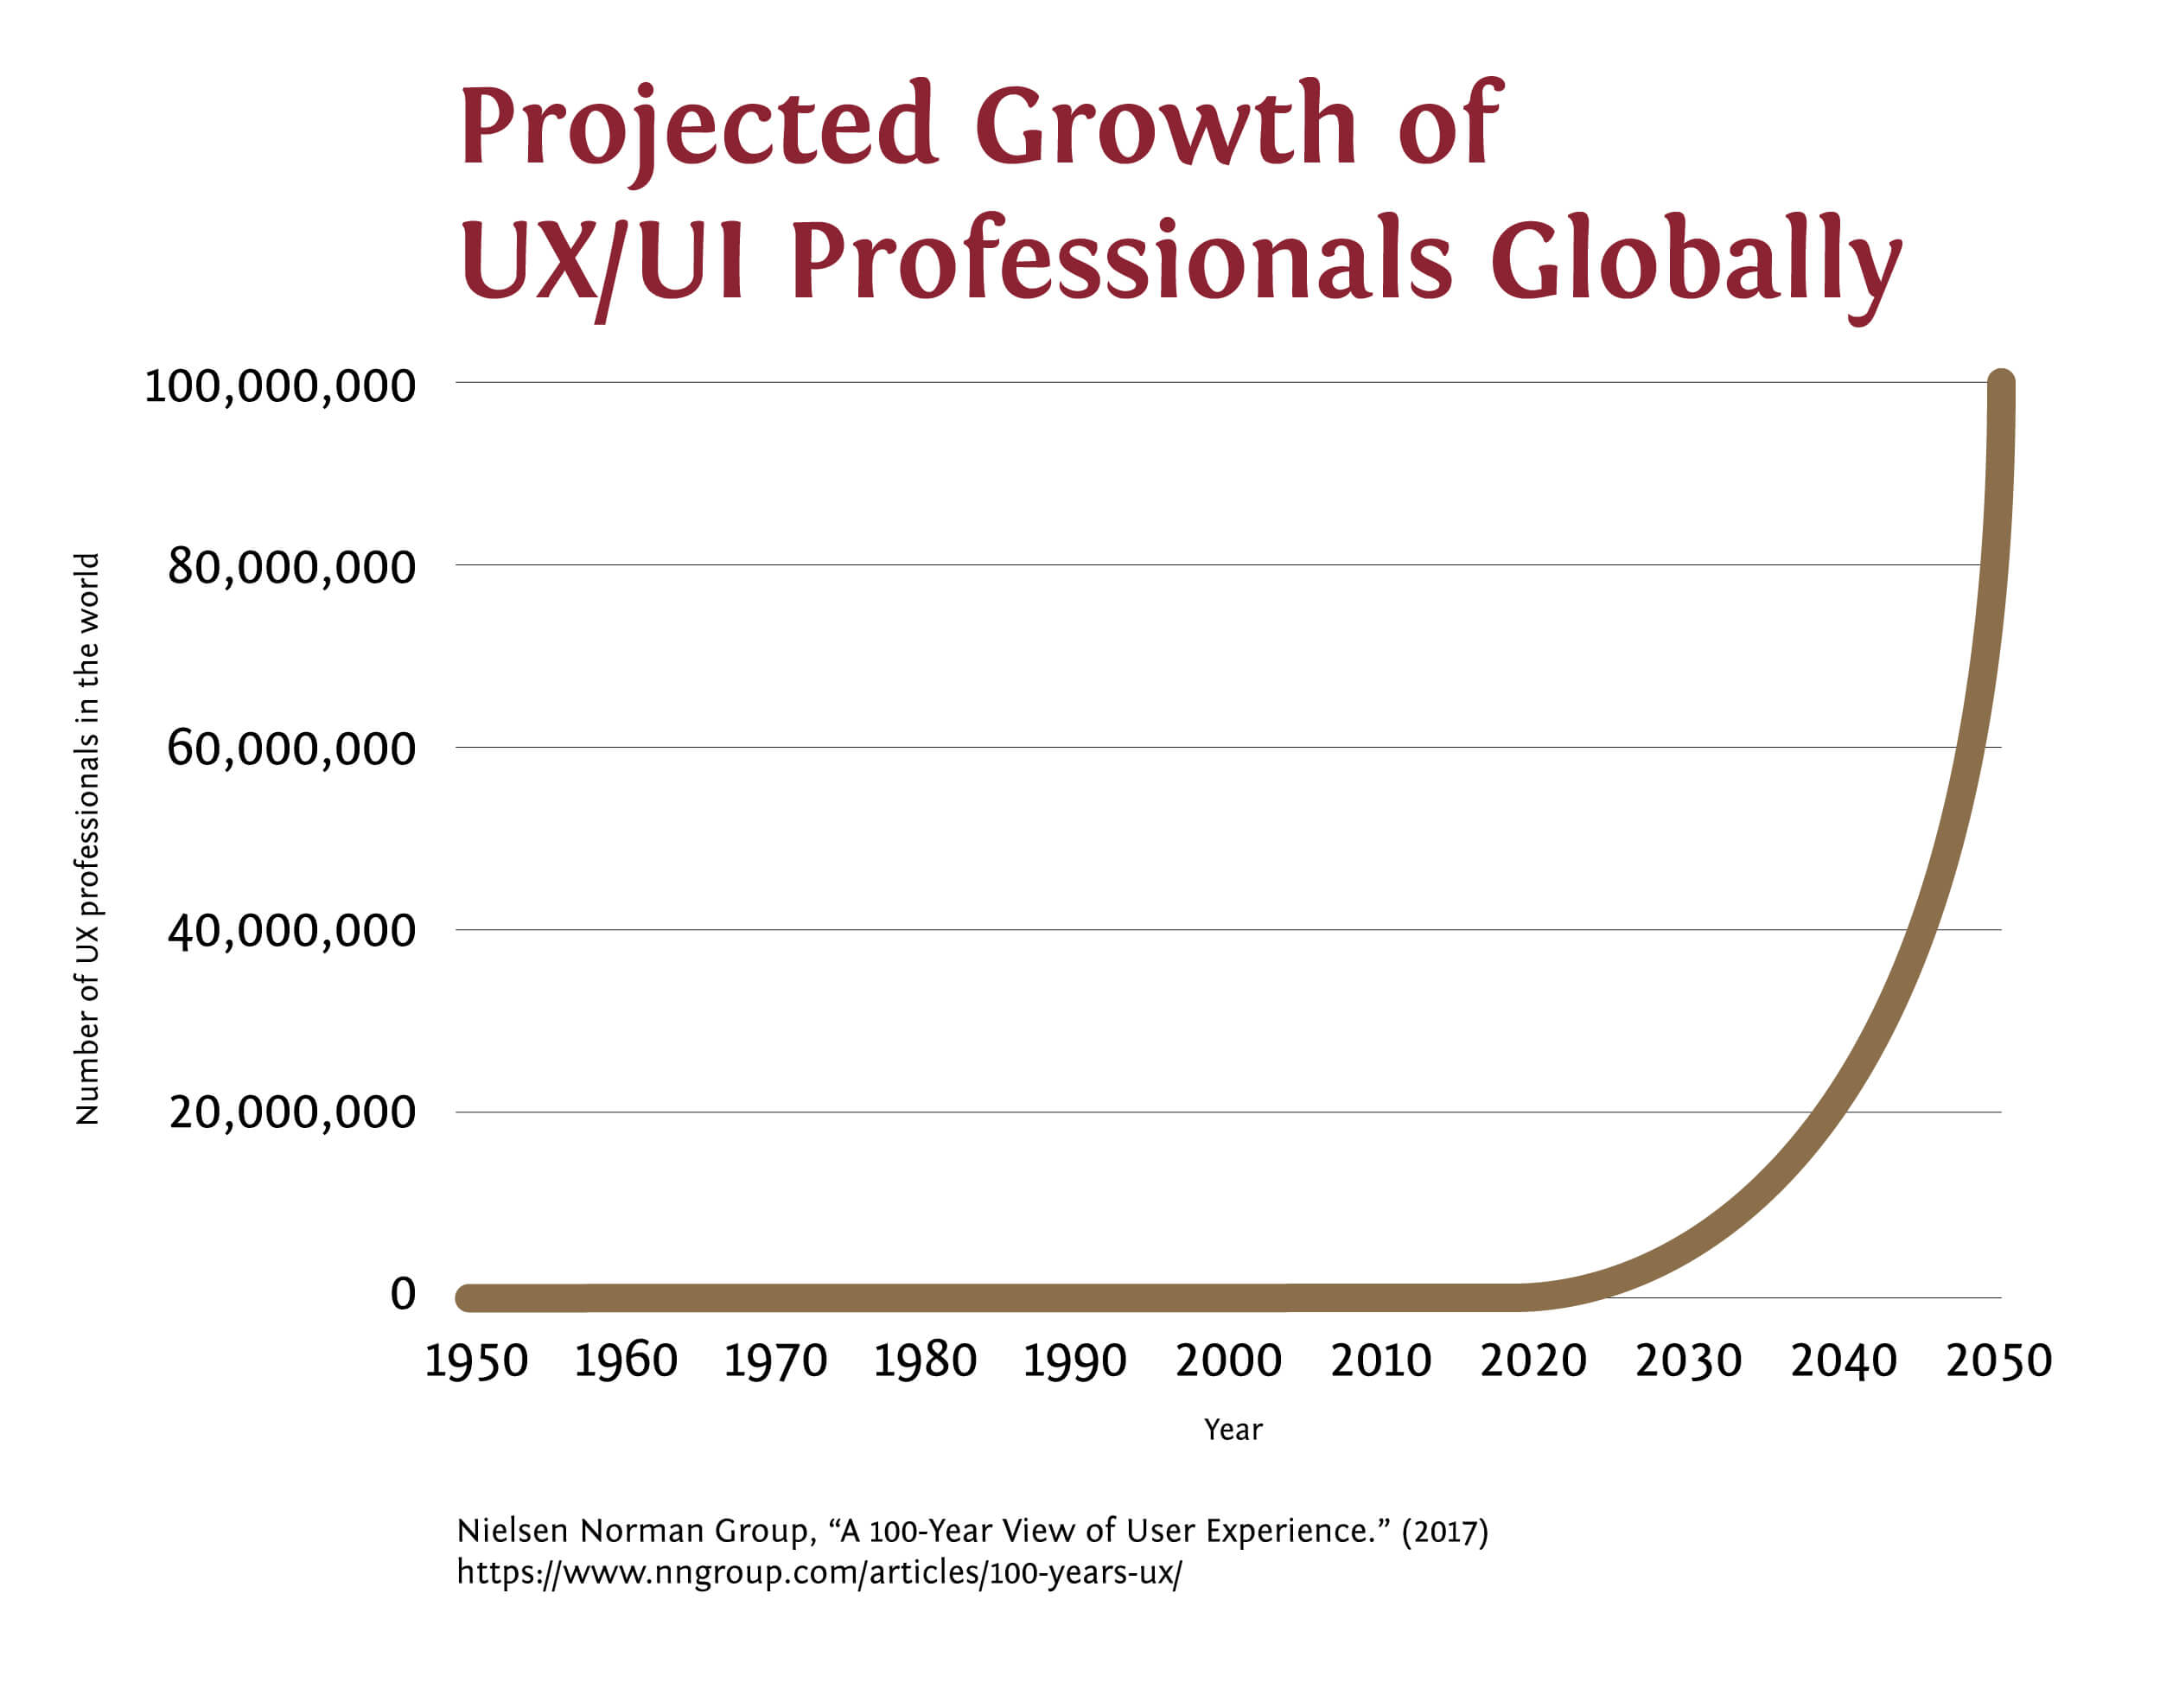 The projected number of UI and UX professionals globally